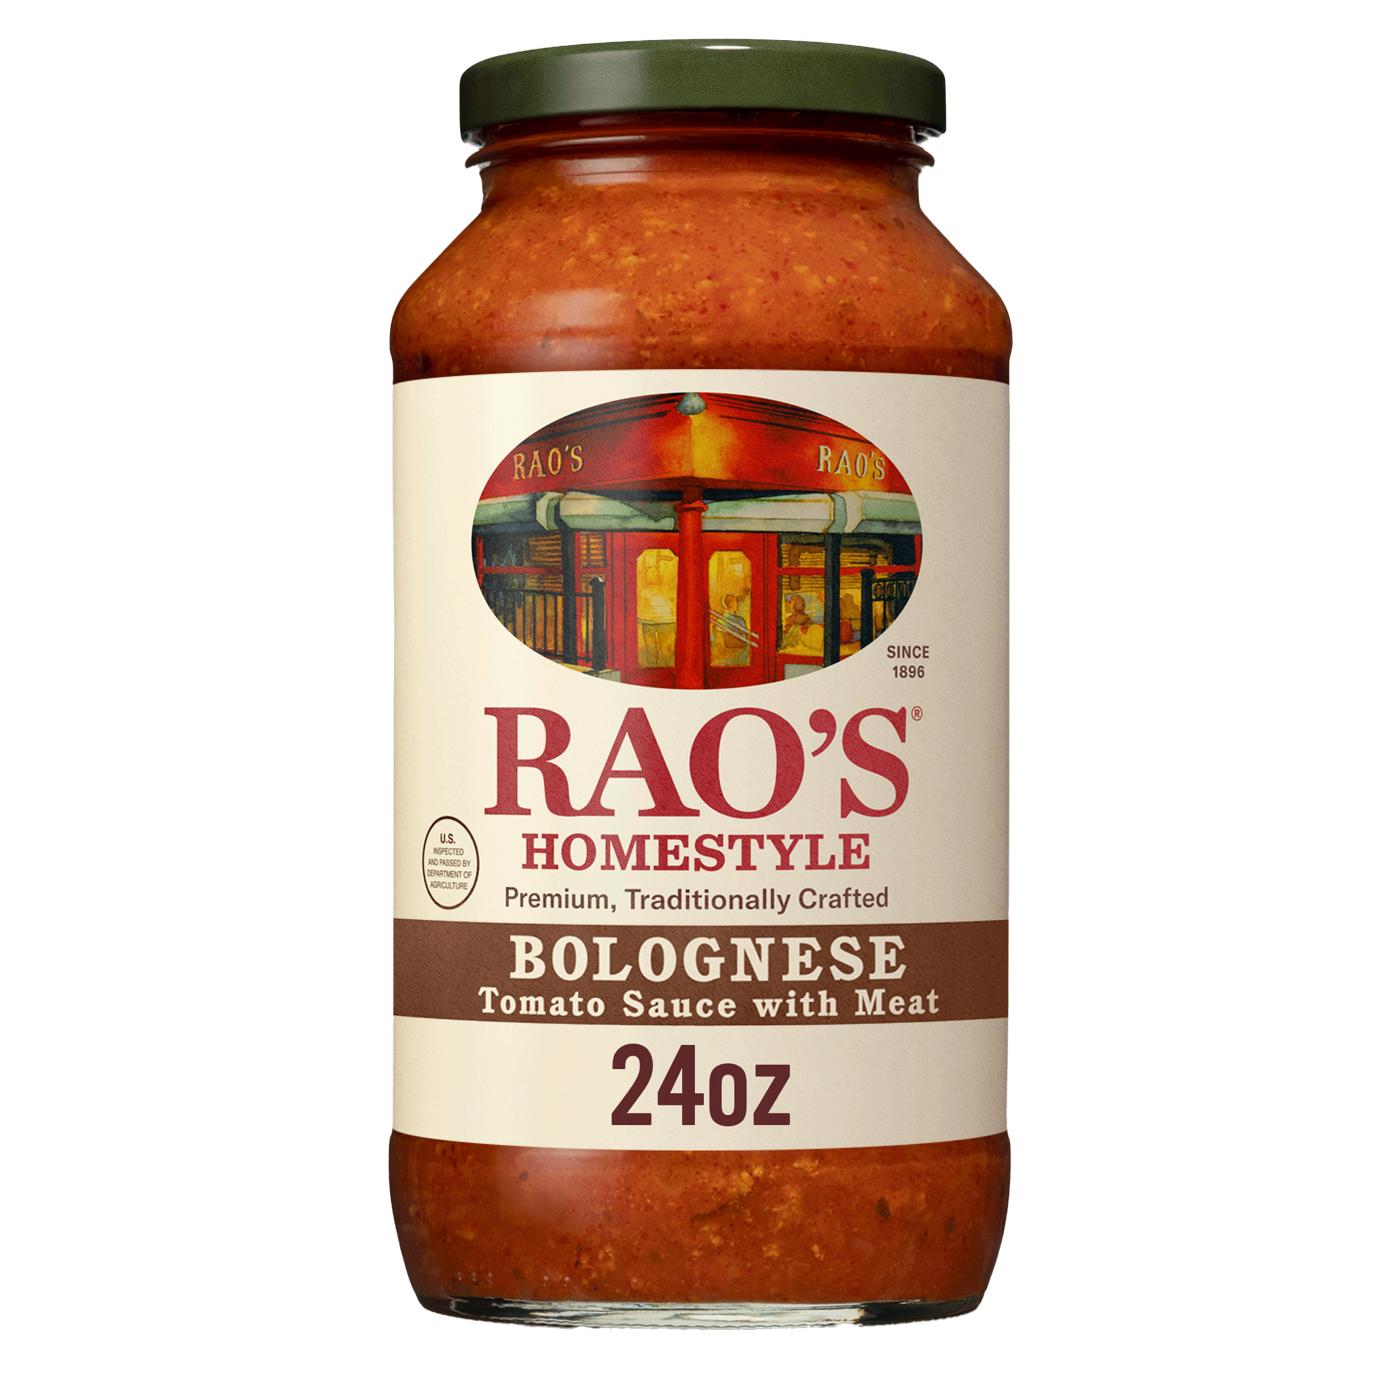 Rao's Homestyle Bolognese Sauce; image 1 of 5